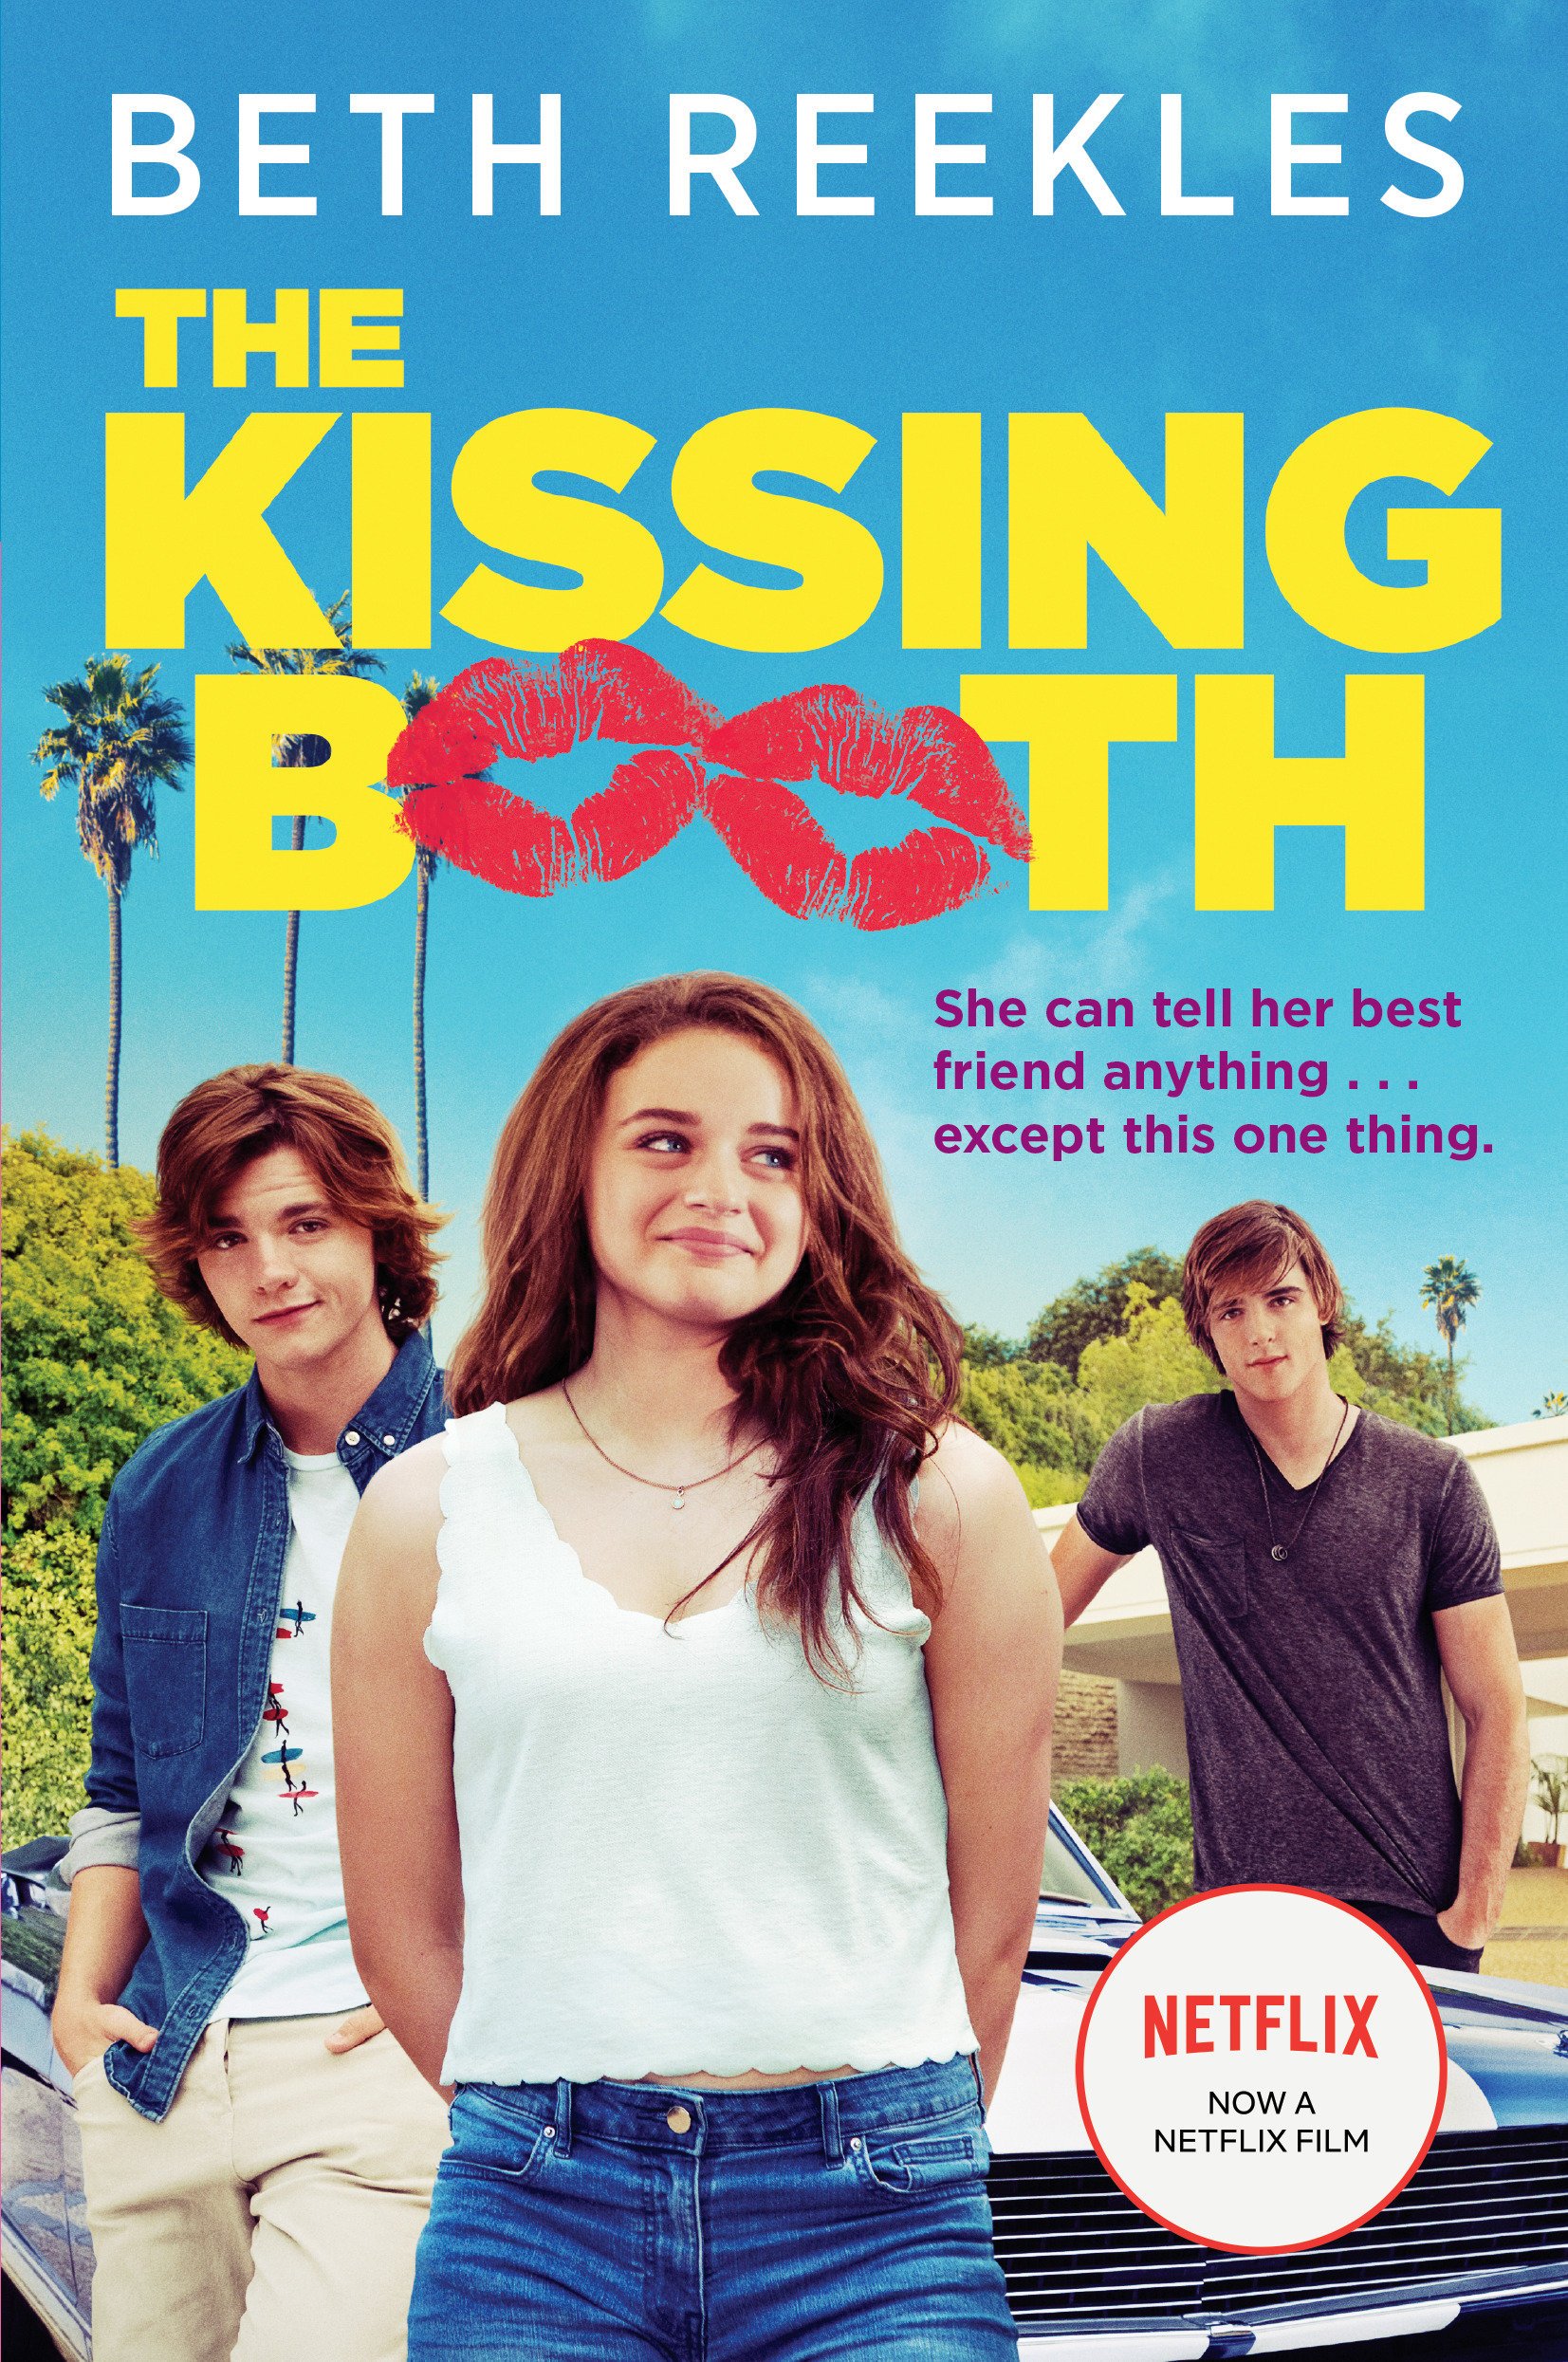 The Kissing Booth: Beth Reekles: Books